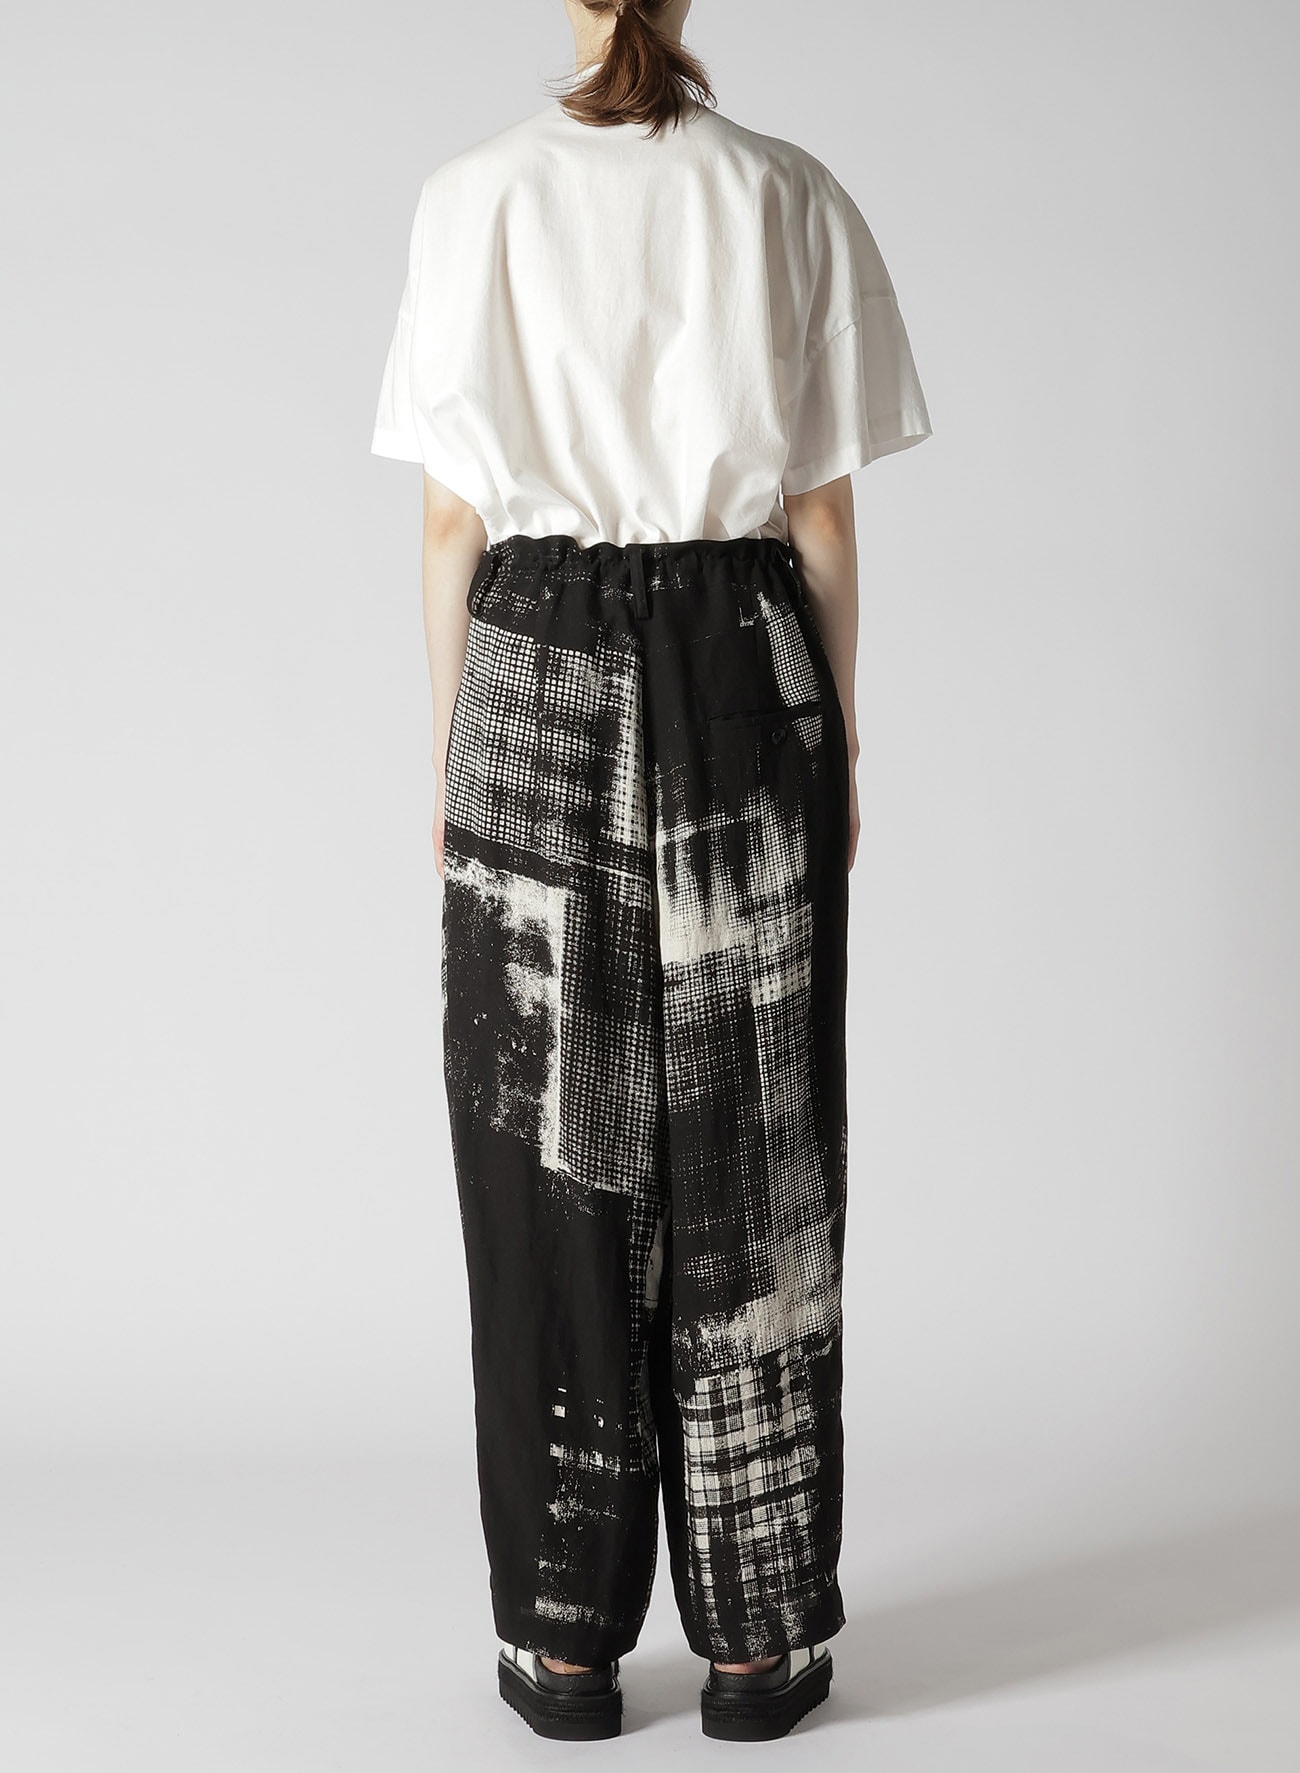 COPIED CHECK PRINT PLEATED PANTS(S Off White): Y's｜THE SHOP YOHJI 